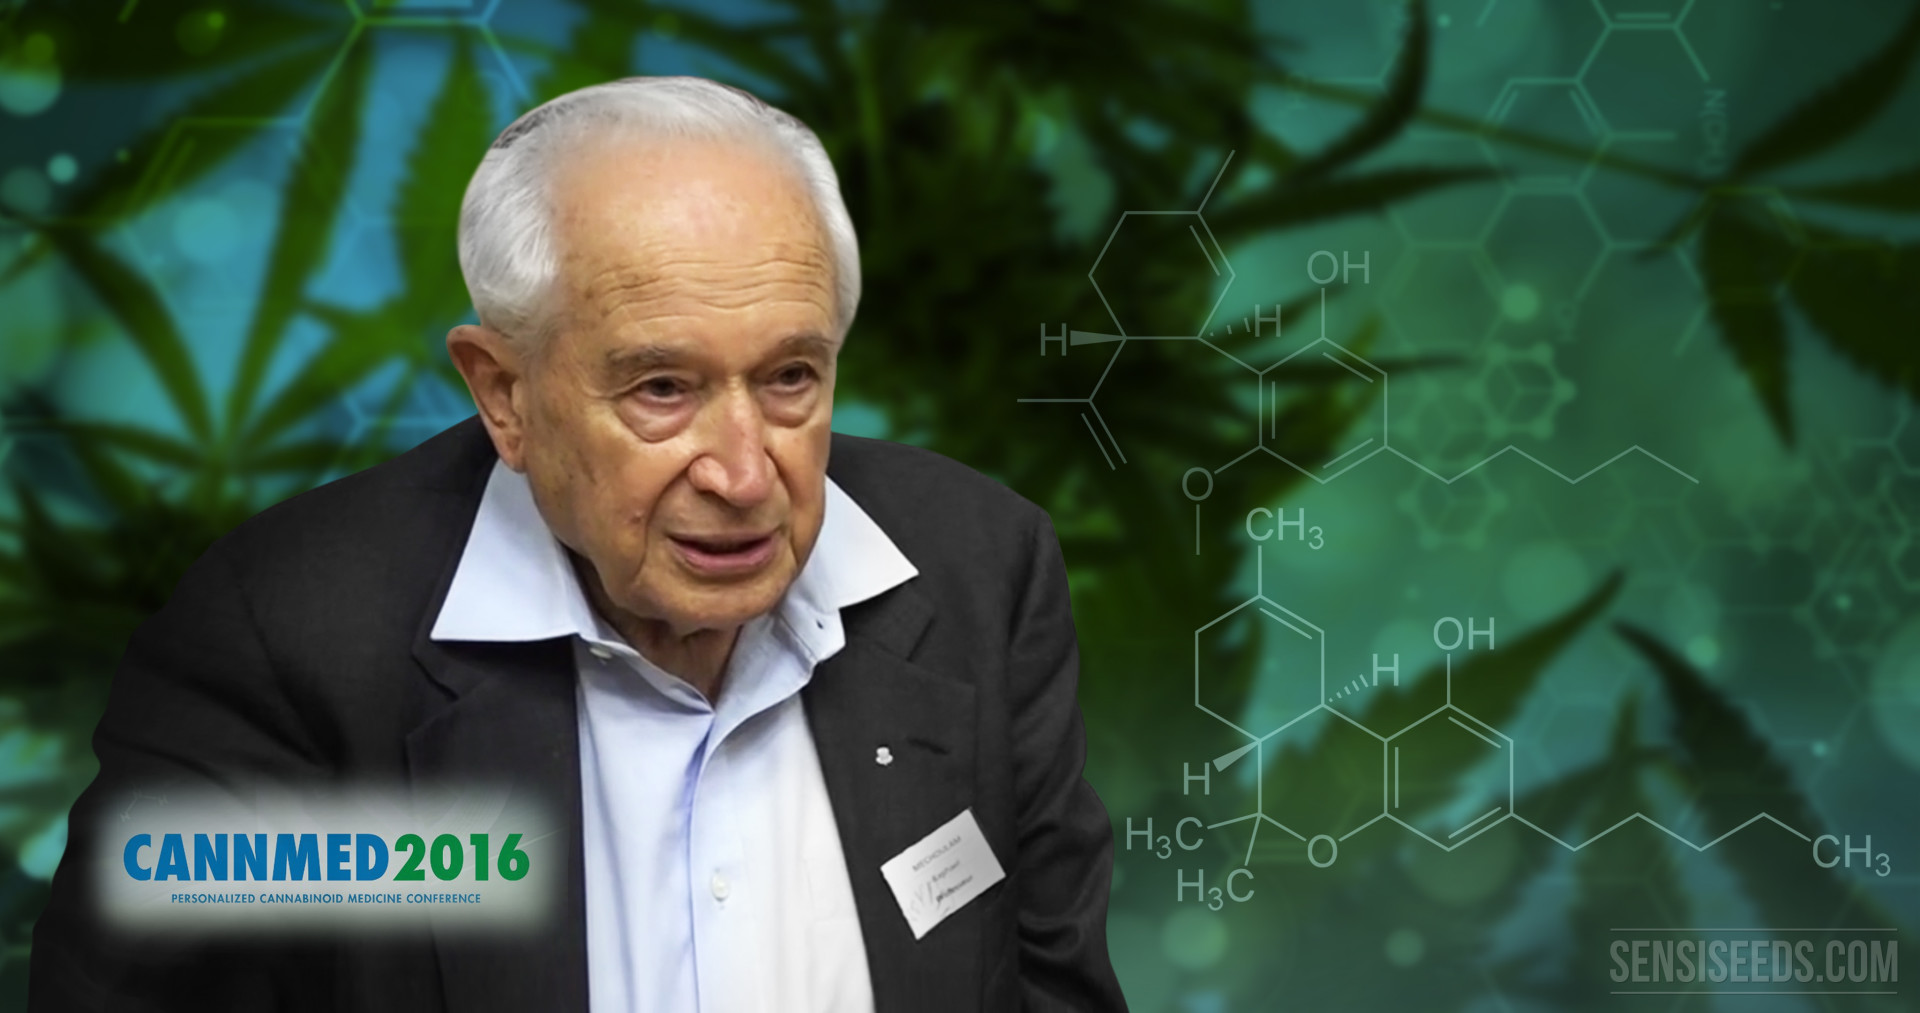 CannMed 2016 honours Dr Mechoulam